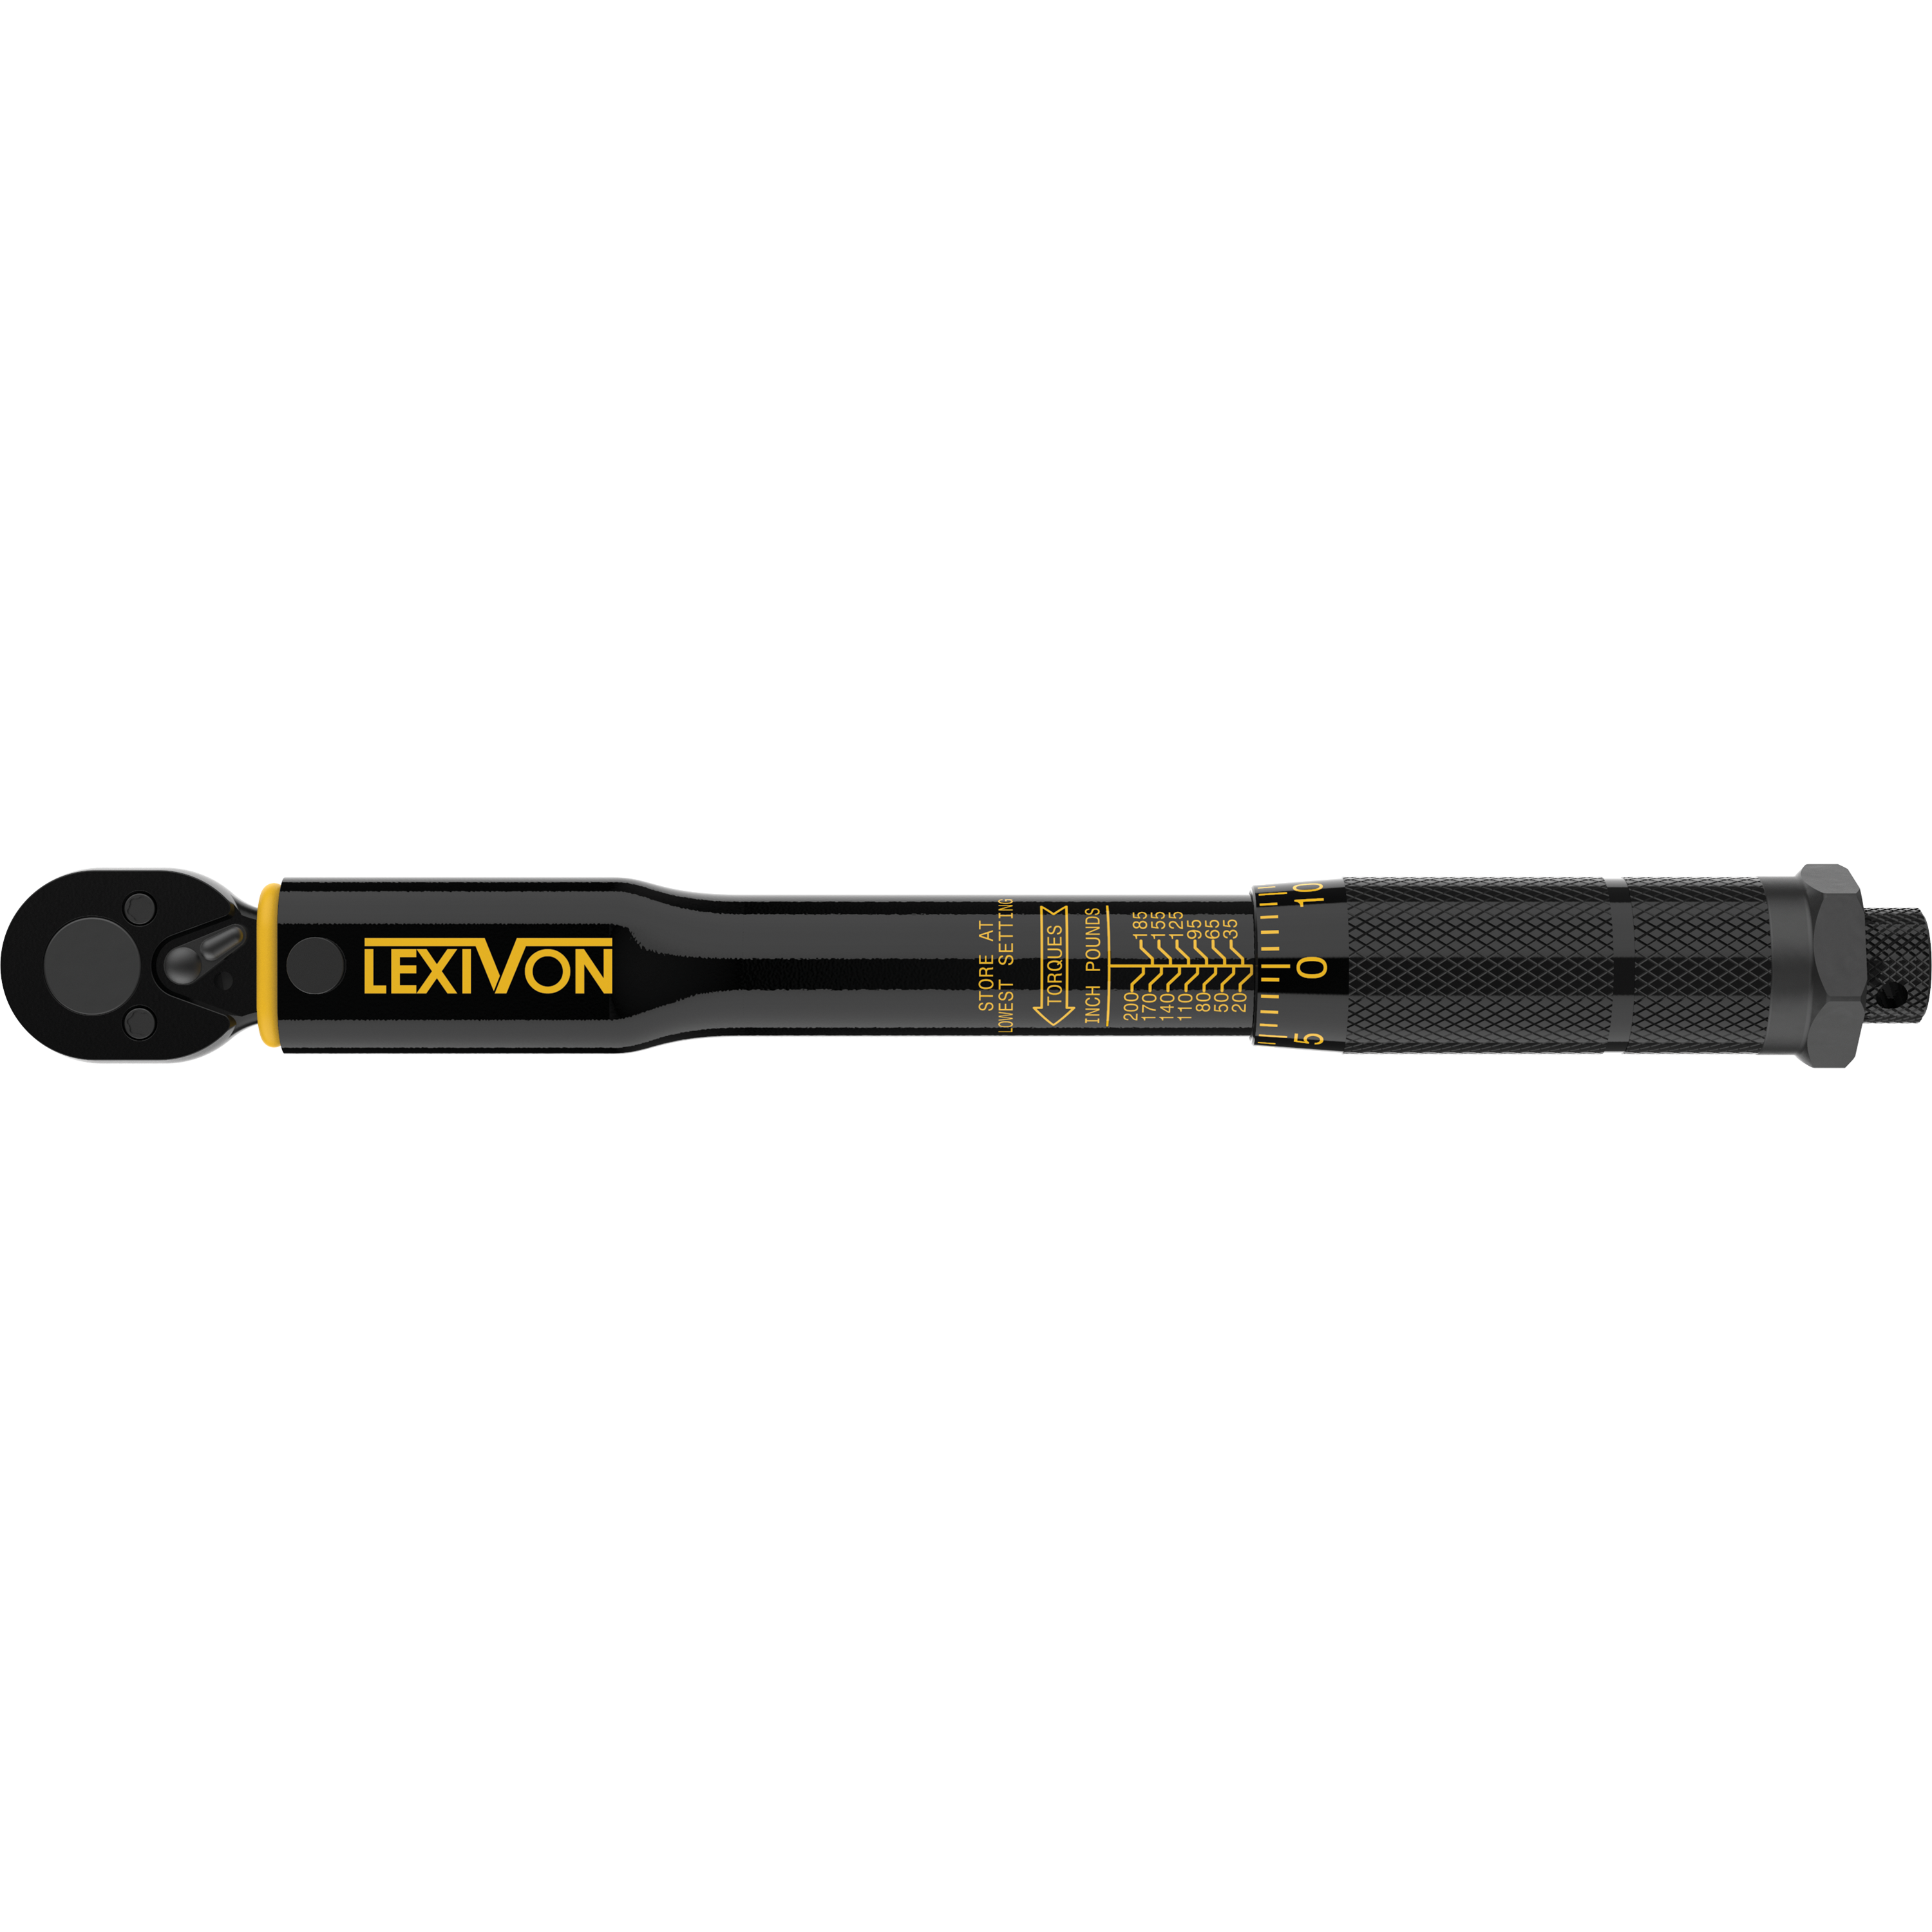 Lexivon Inch Pound Torque Wrench 1/4-Inch Drive 20-200 in-lb/2.26-22.6 Nm  (LX-181)